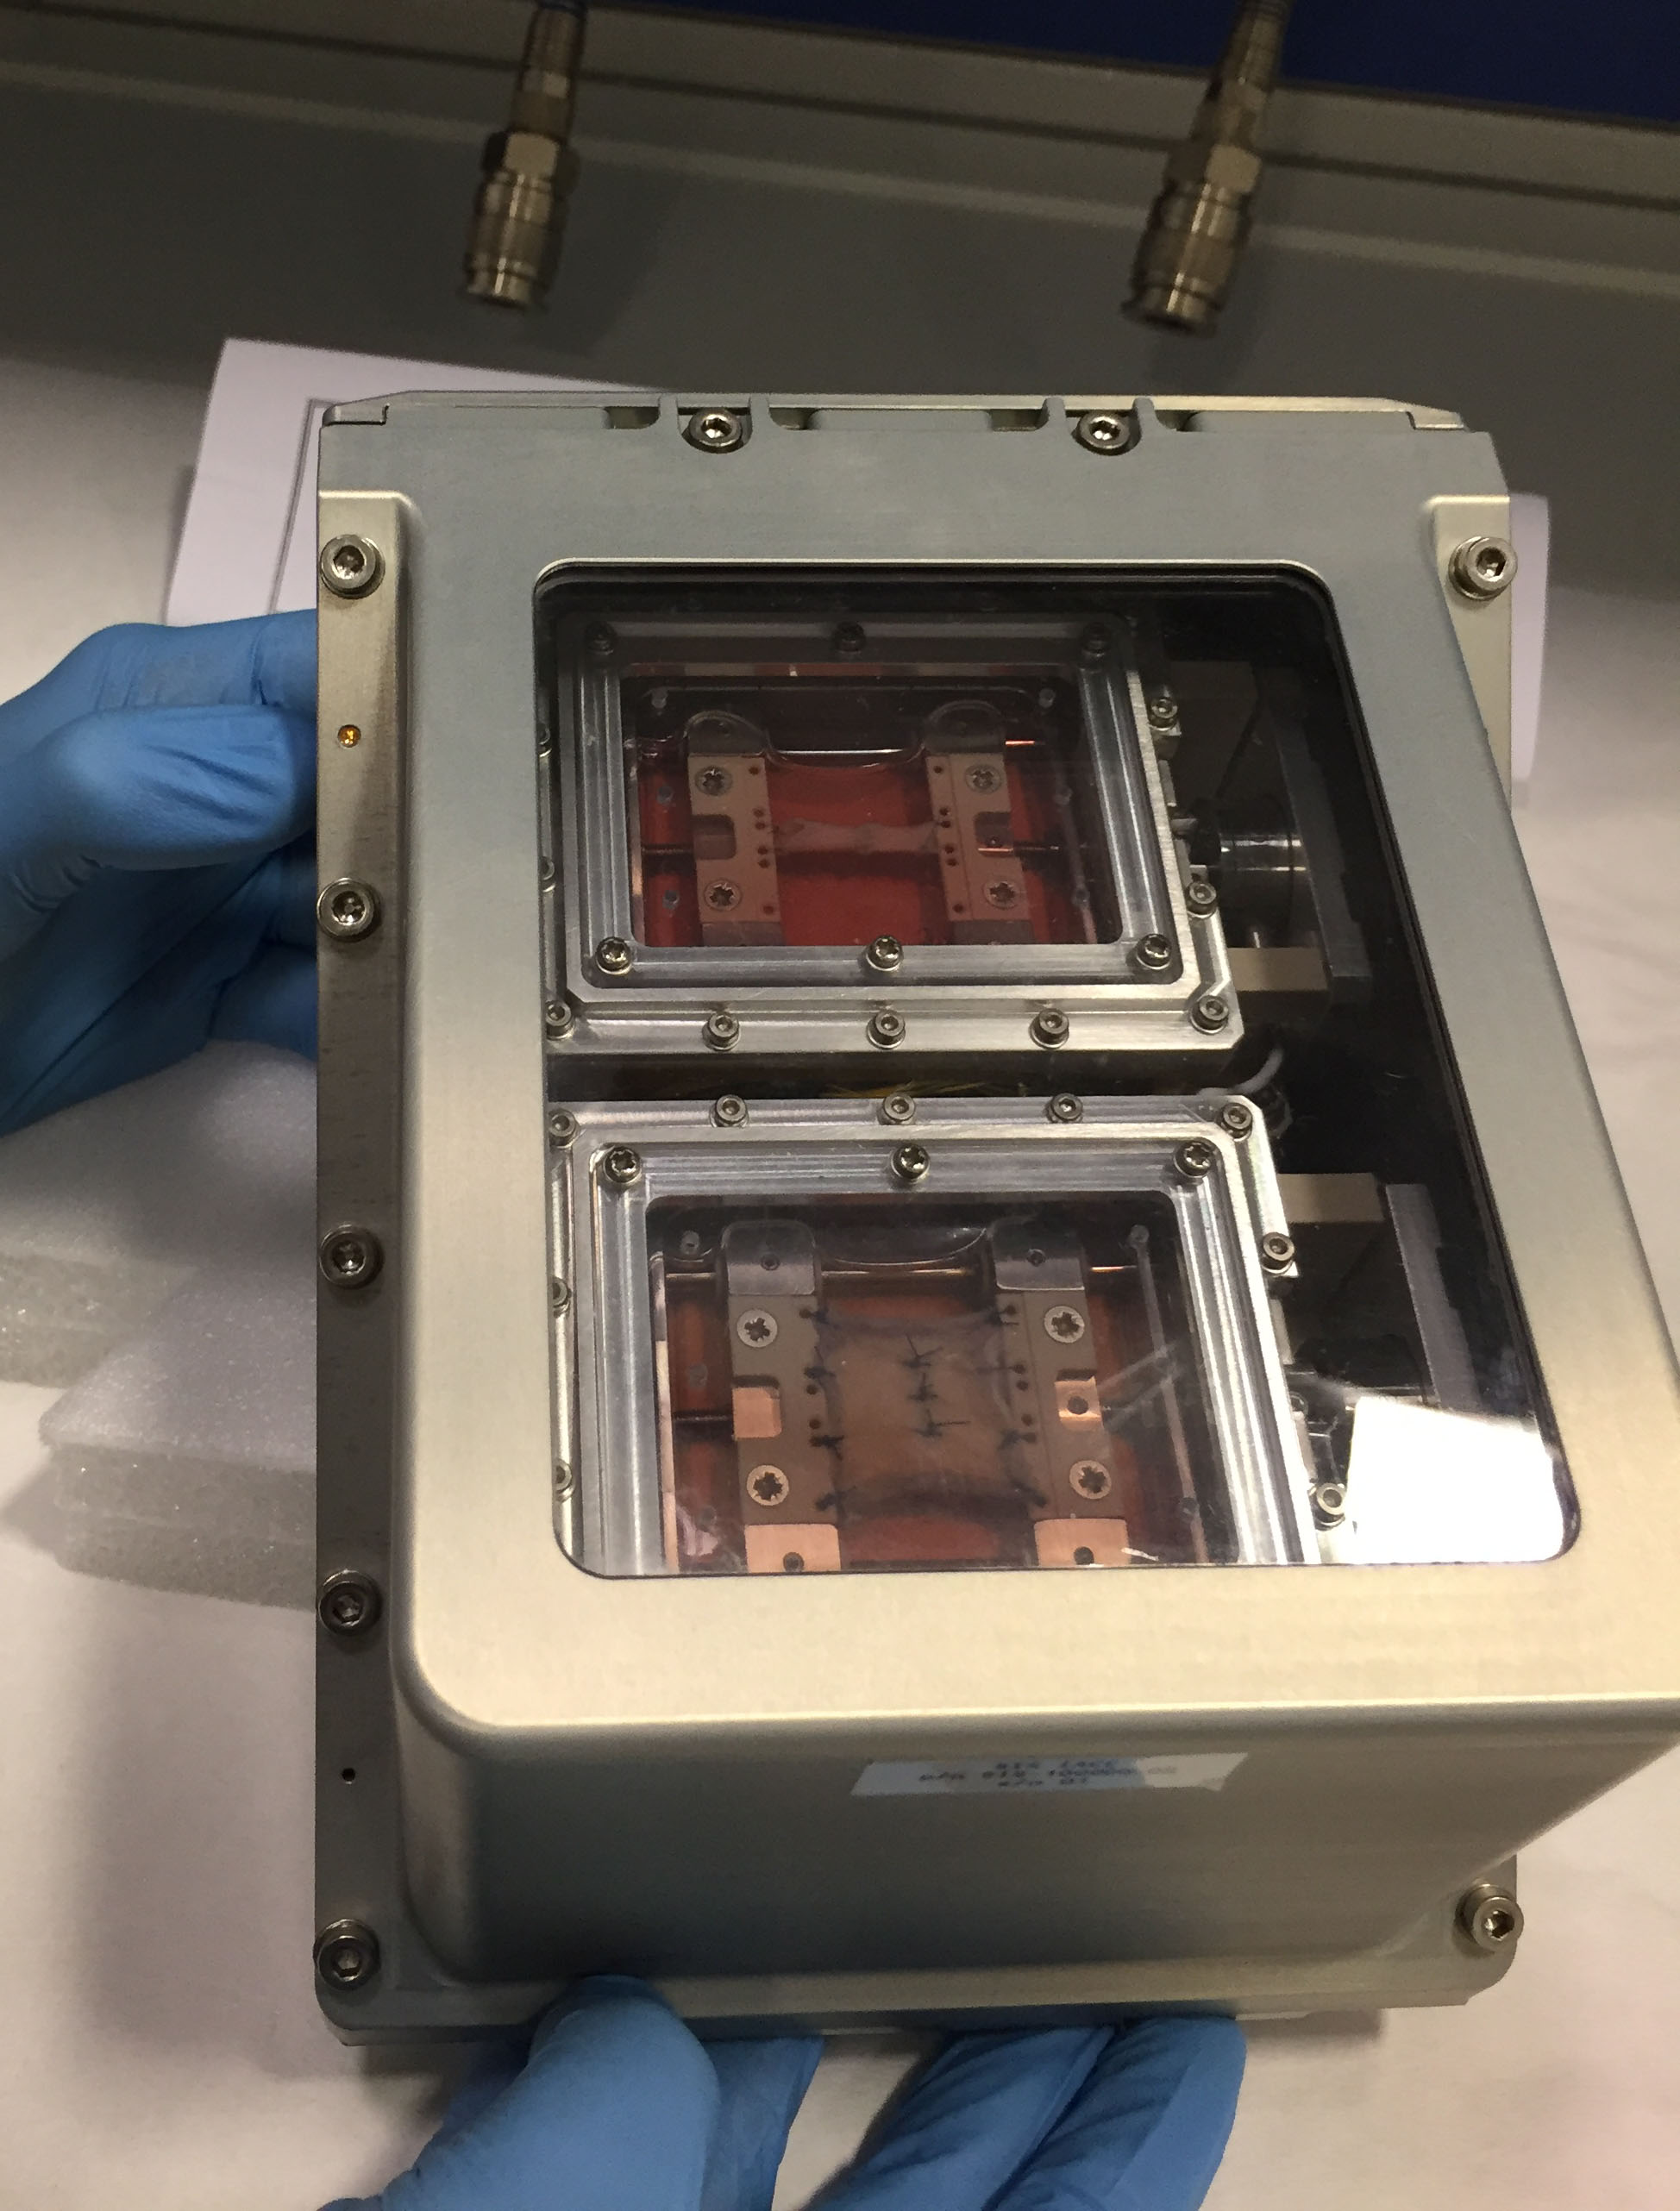 This image shows skin samples cultured in the Suture in Space hardware prior to flight. This ESA investigation examines the behavior of sutures and wound healing in microgravity.